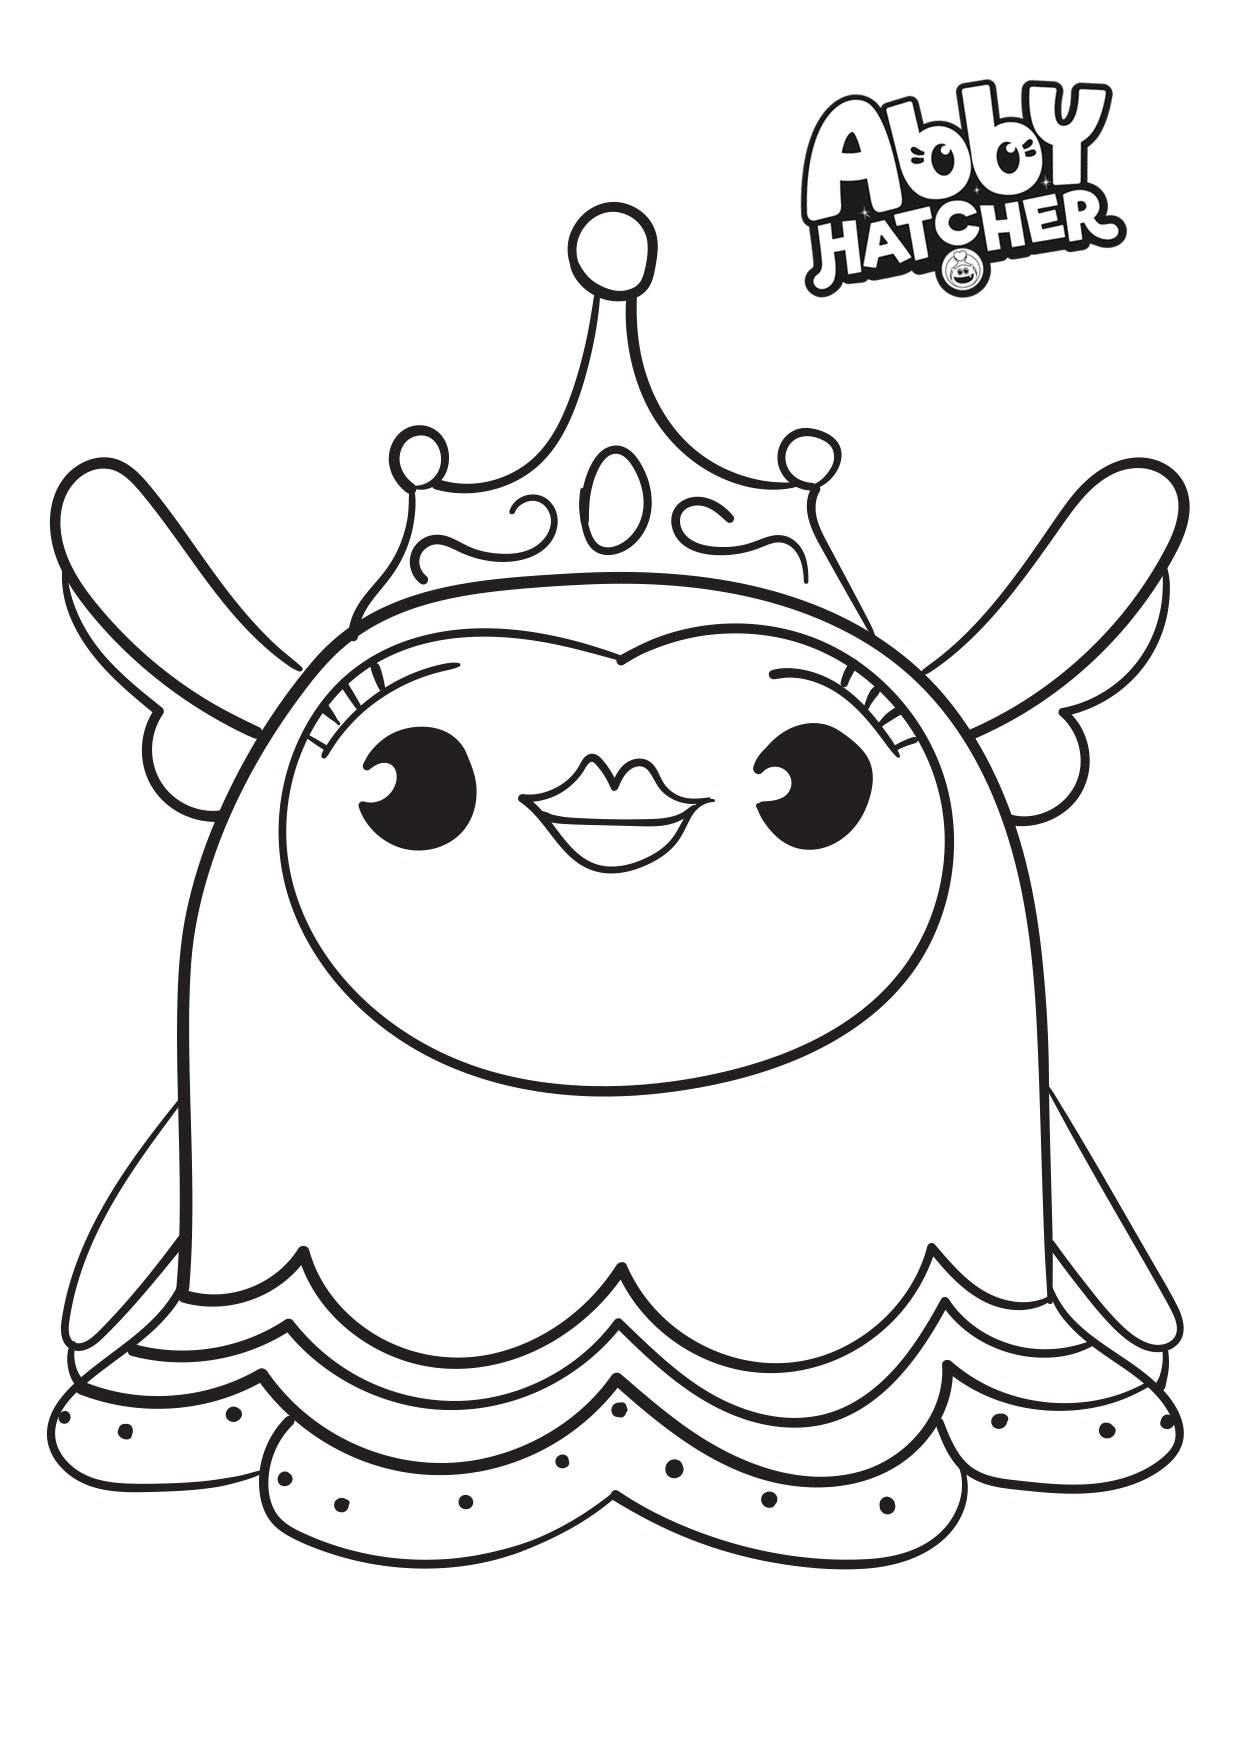 Coloring Pages Princess Flug From Abby Hatcher Nick Jr Coloring Book ...